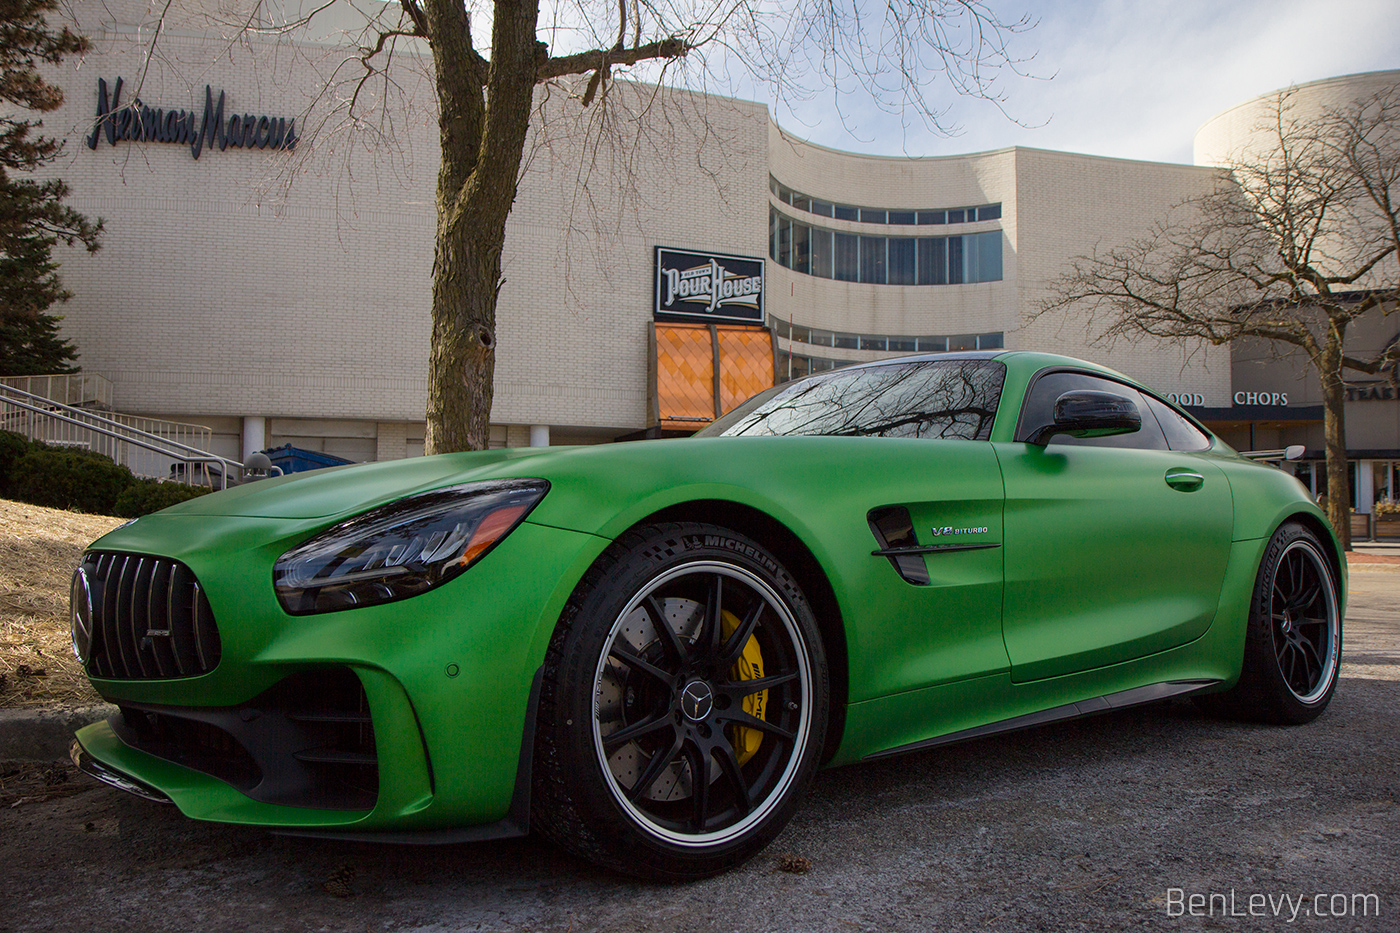 Green Mercedes-AMG GT R ourside of a mall